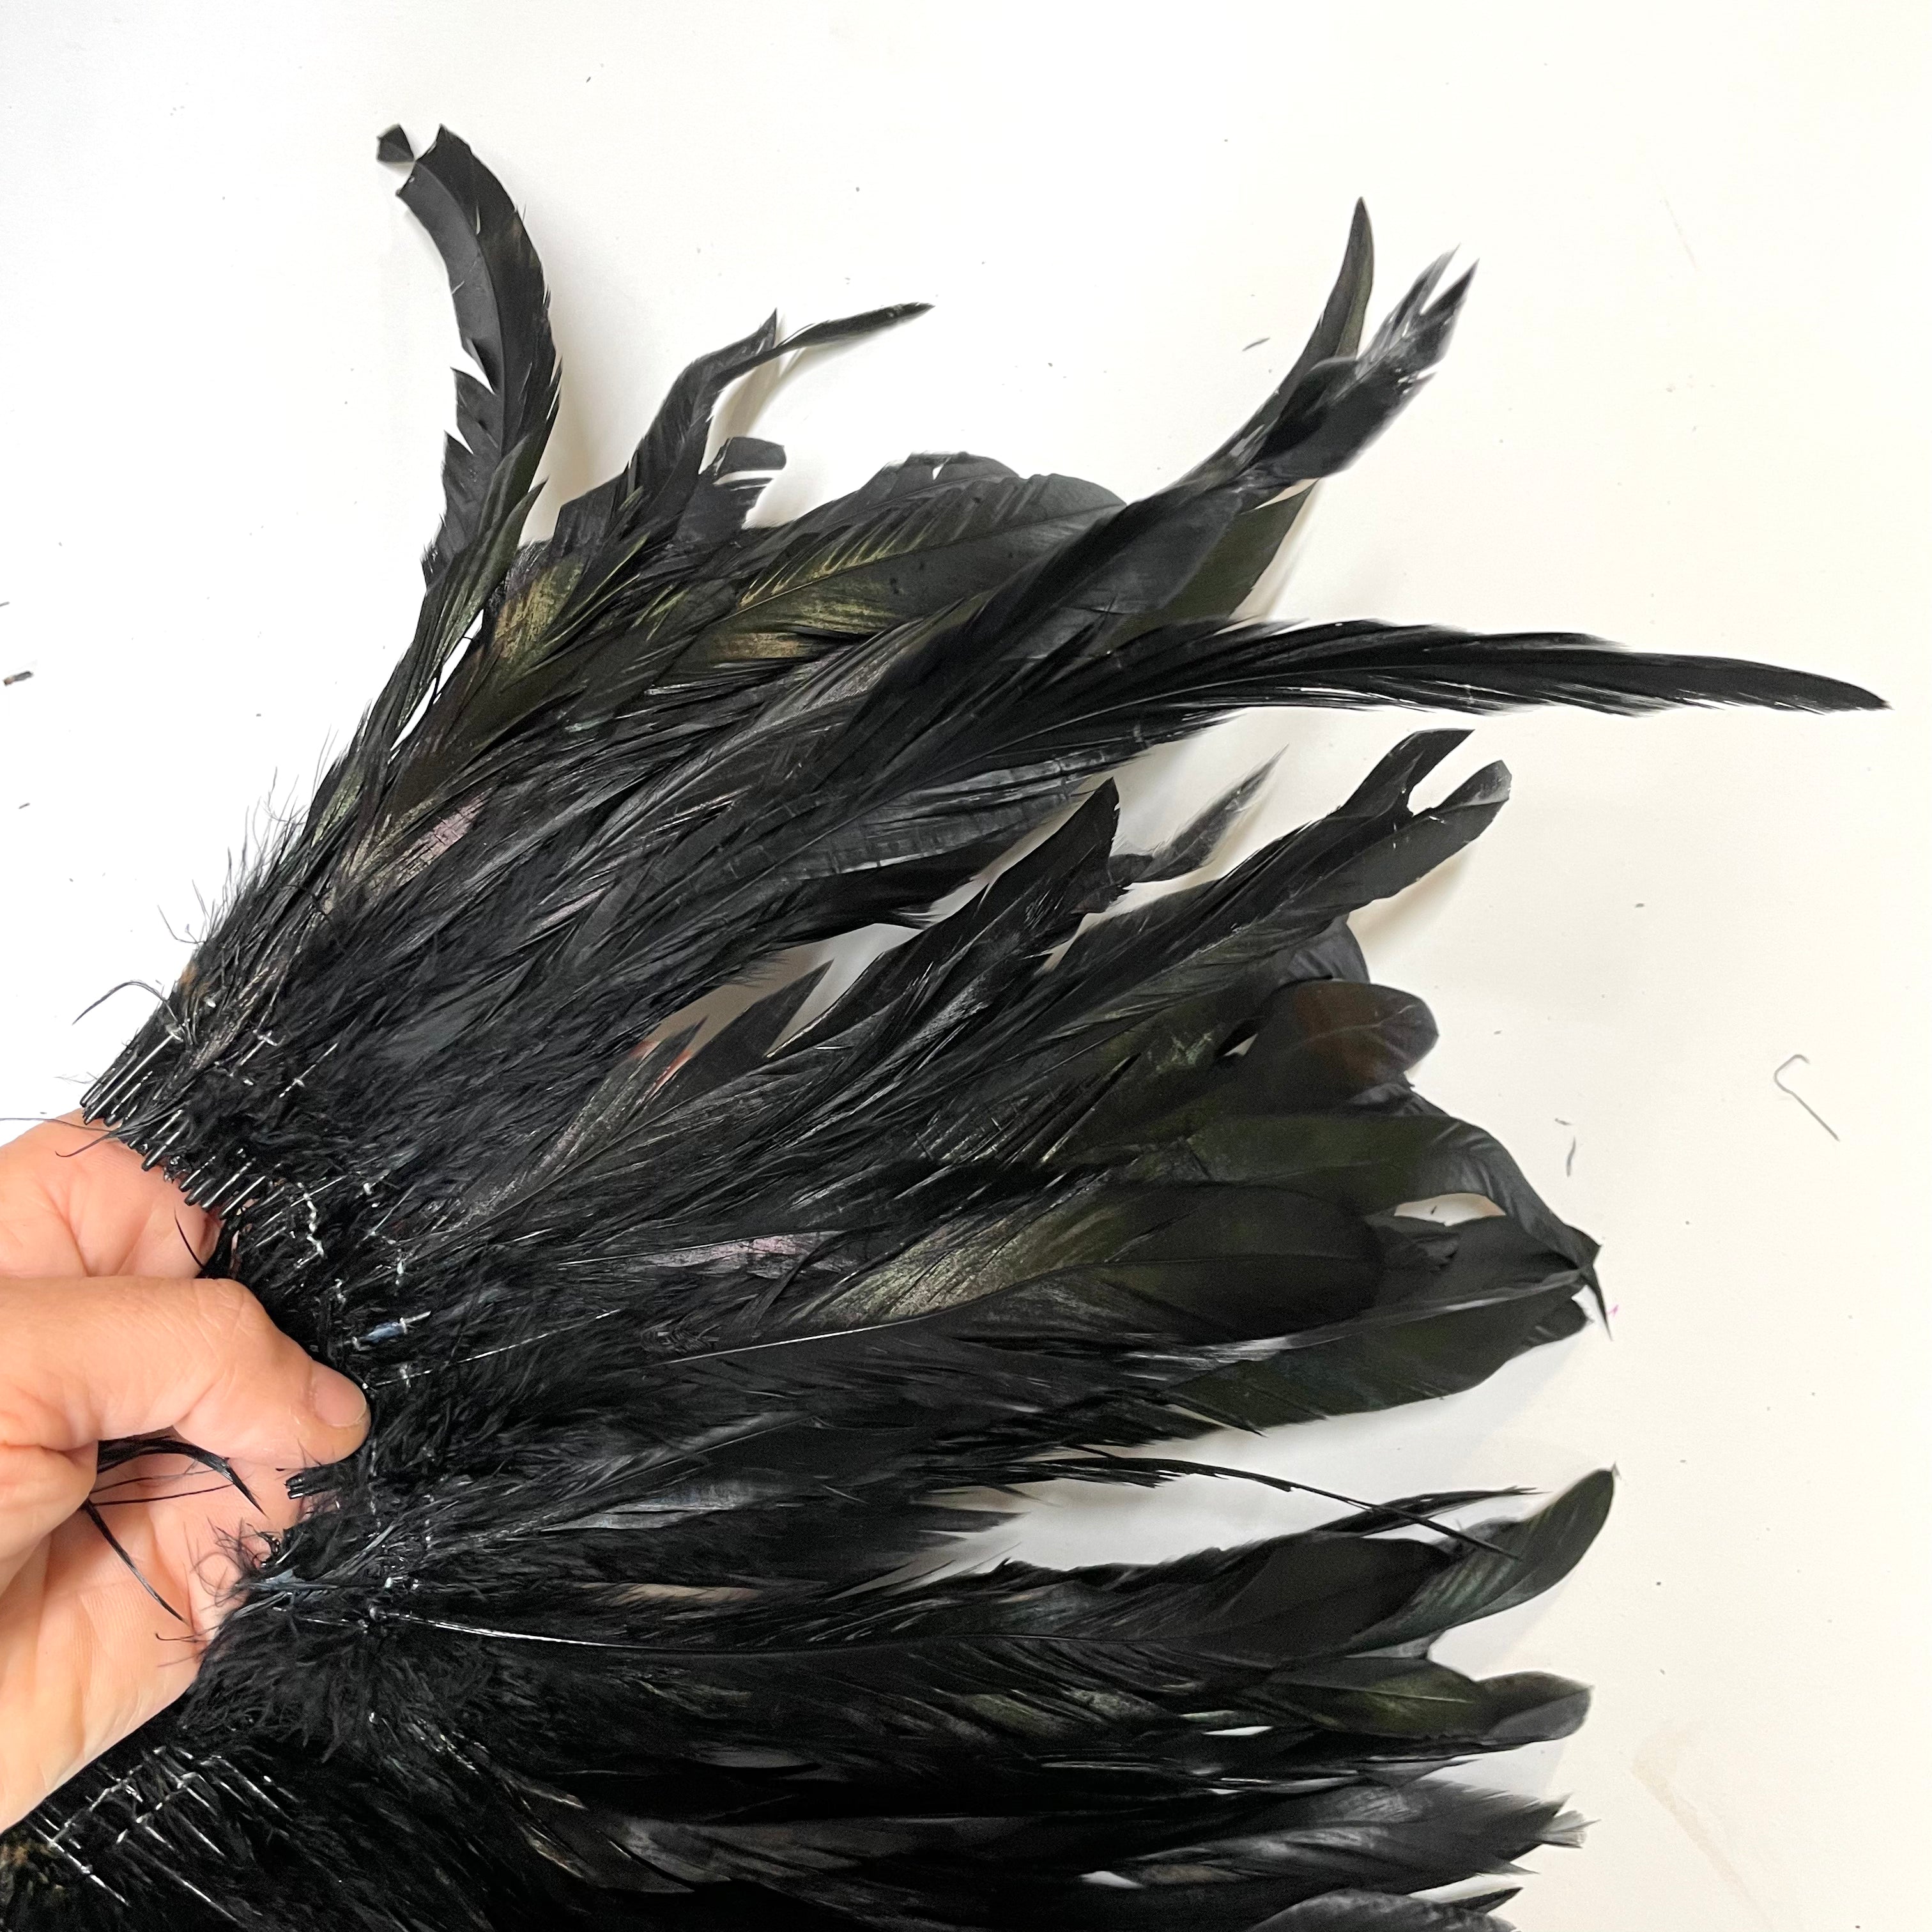 Coque Tail Feather Strung 8/10" - 240mm per 10cm - Black Dyed